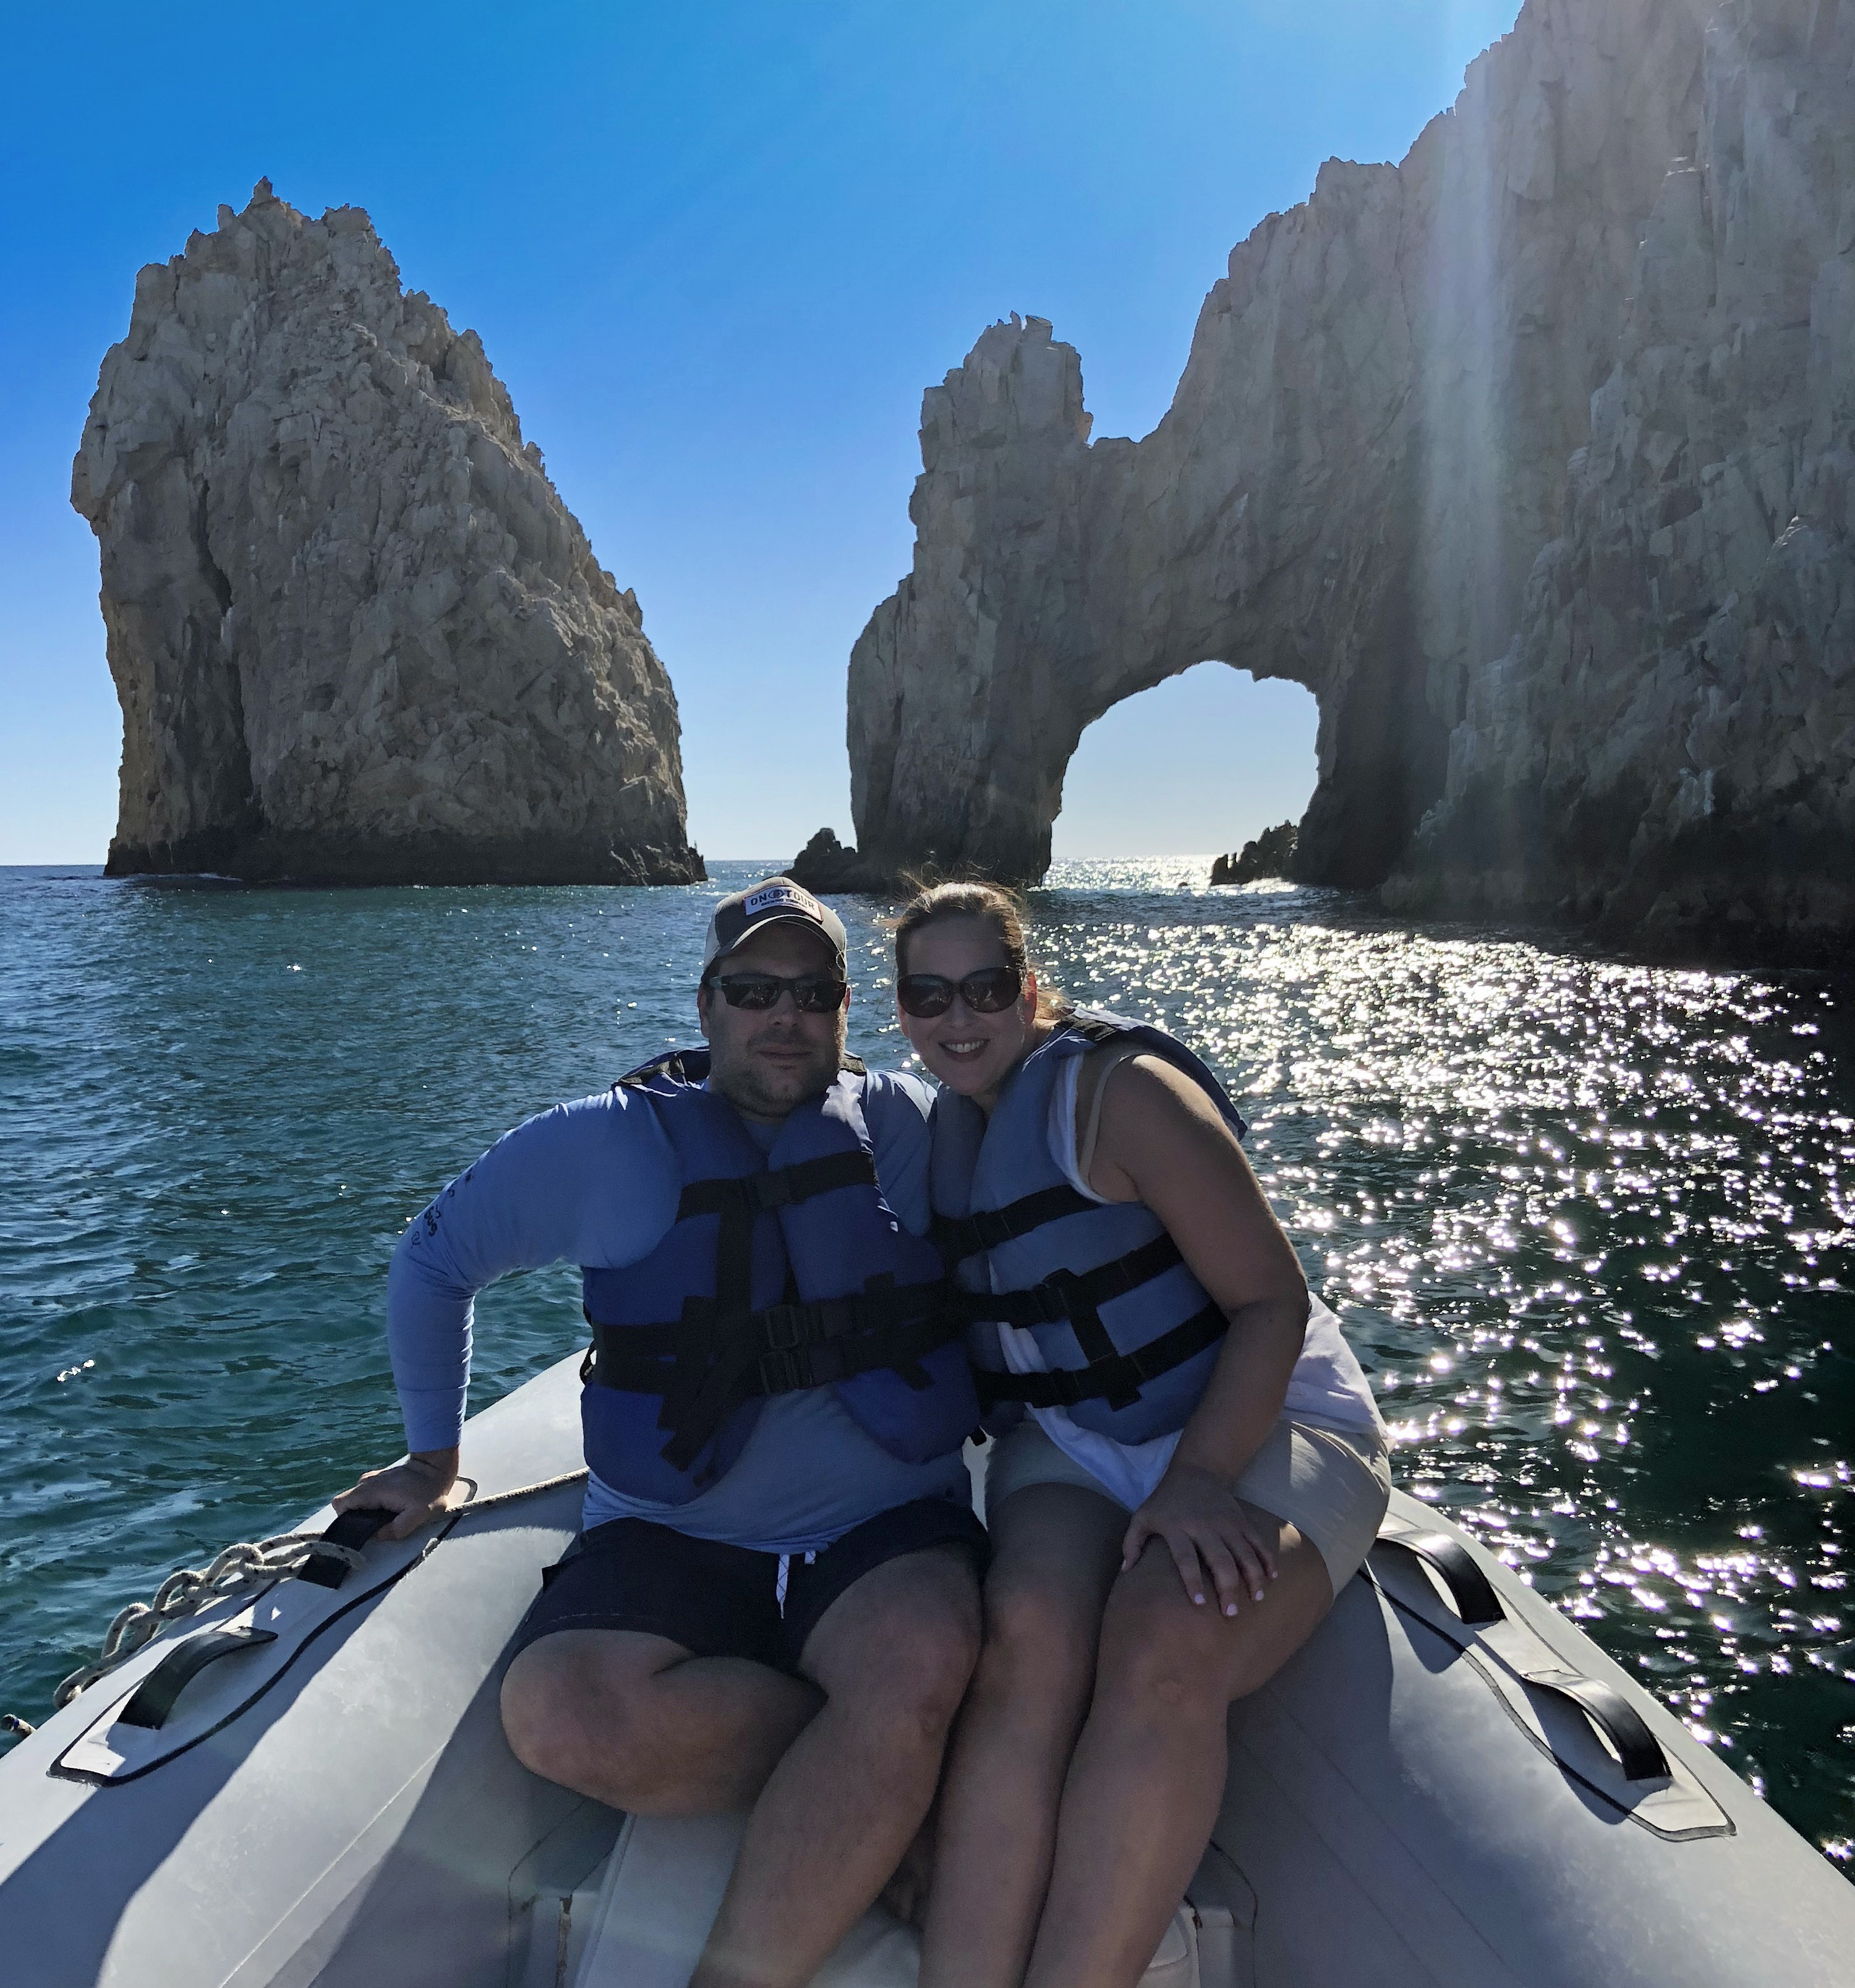 Whale Watching Los Cabos Mexico